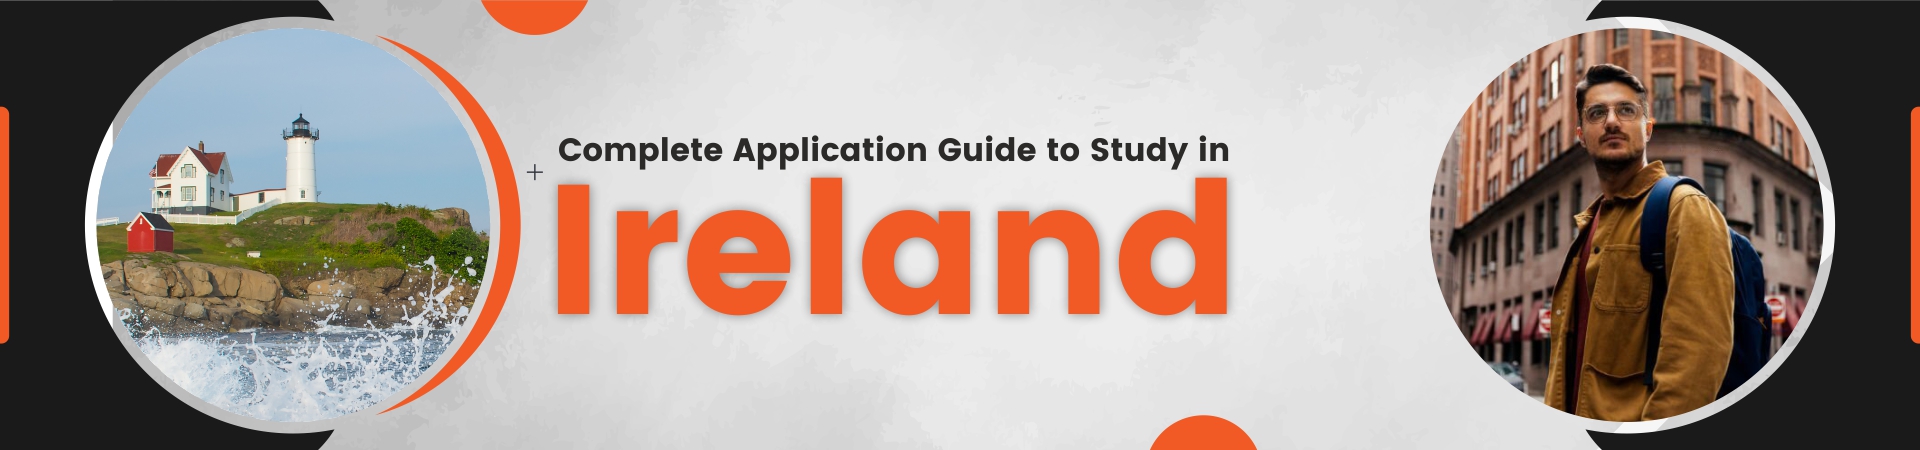 Complete Application Guide to Study in Ireland